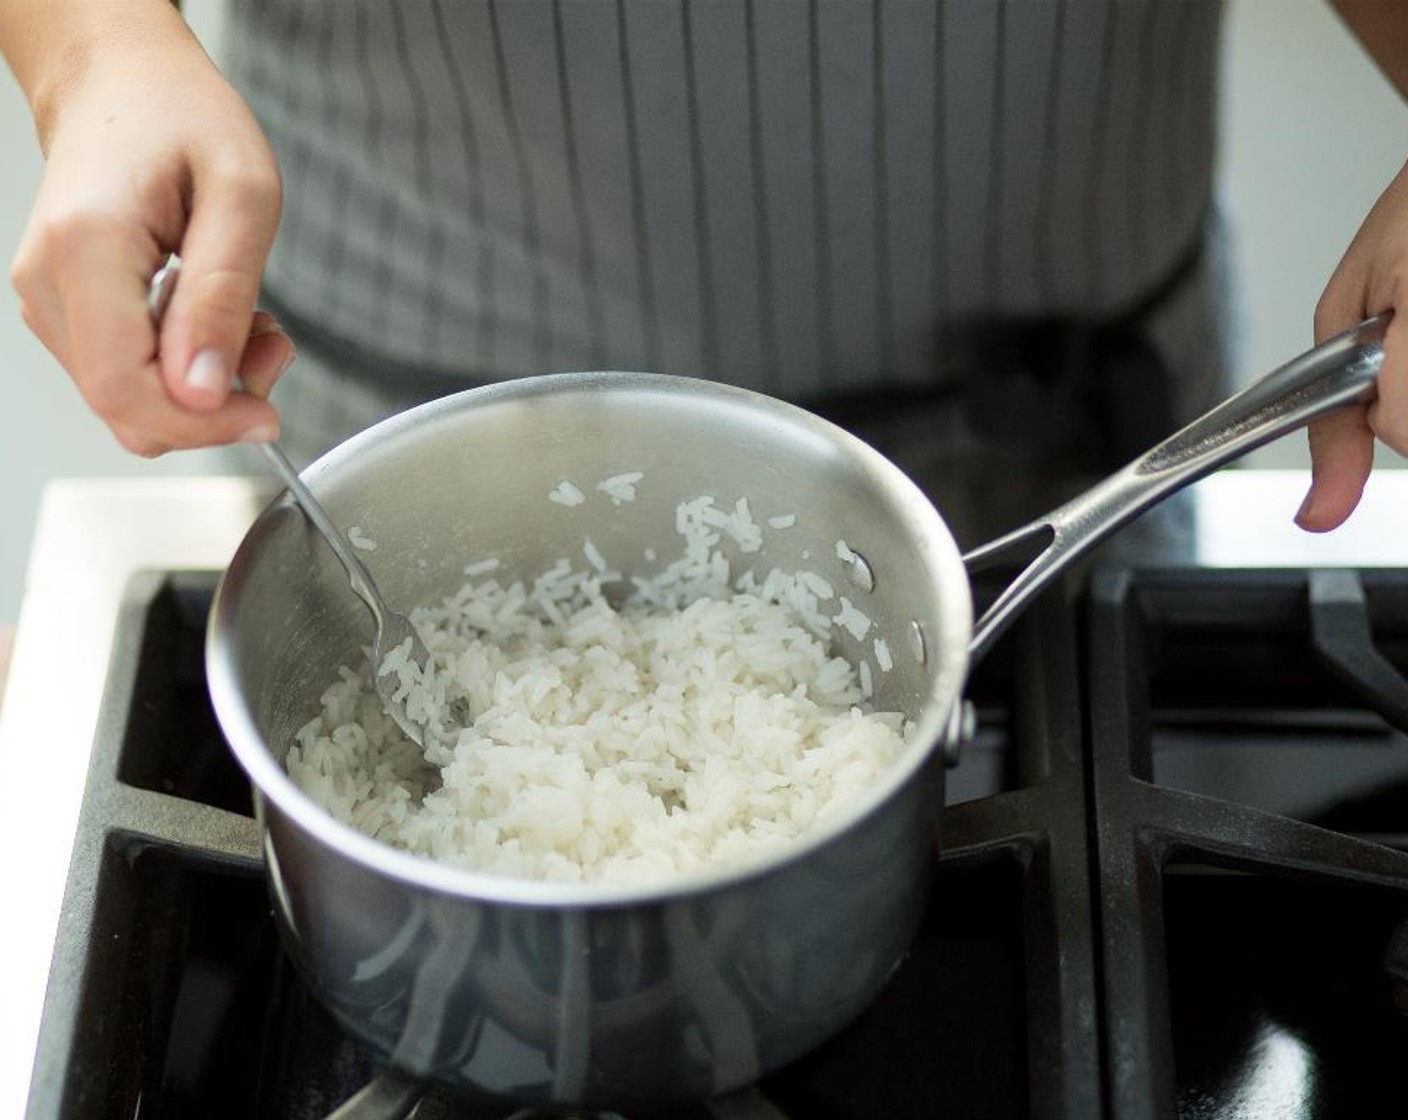 step 4 Combine Jasmine Rice (2/3 cup) and Water (1 cup) in a small saucepot over medium-high heat. When water comes to a boil, stir, cover, reduce the heat to low and simmer for 15 minutes. Fluff rice with a fork and keep warm for plating.